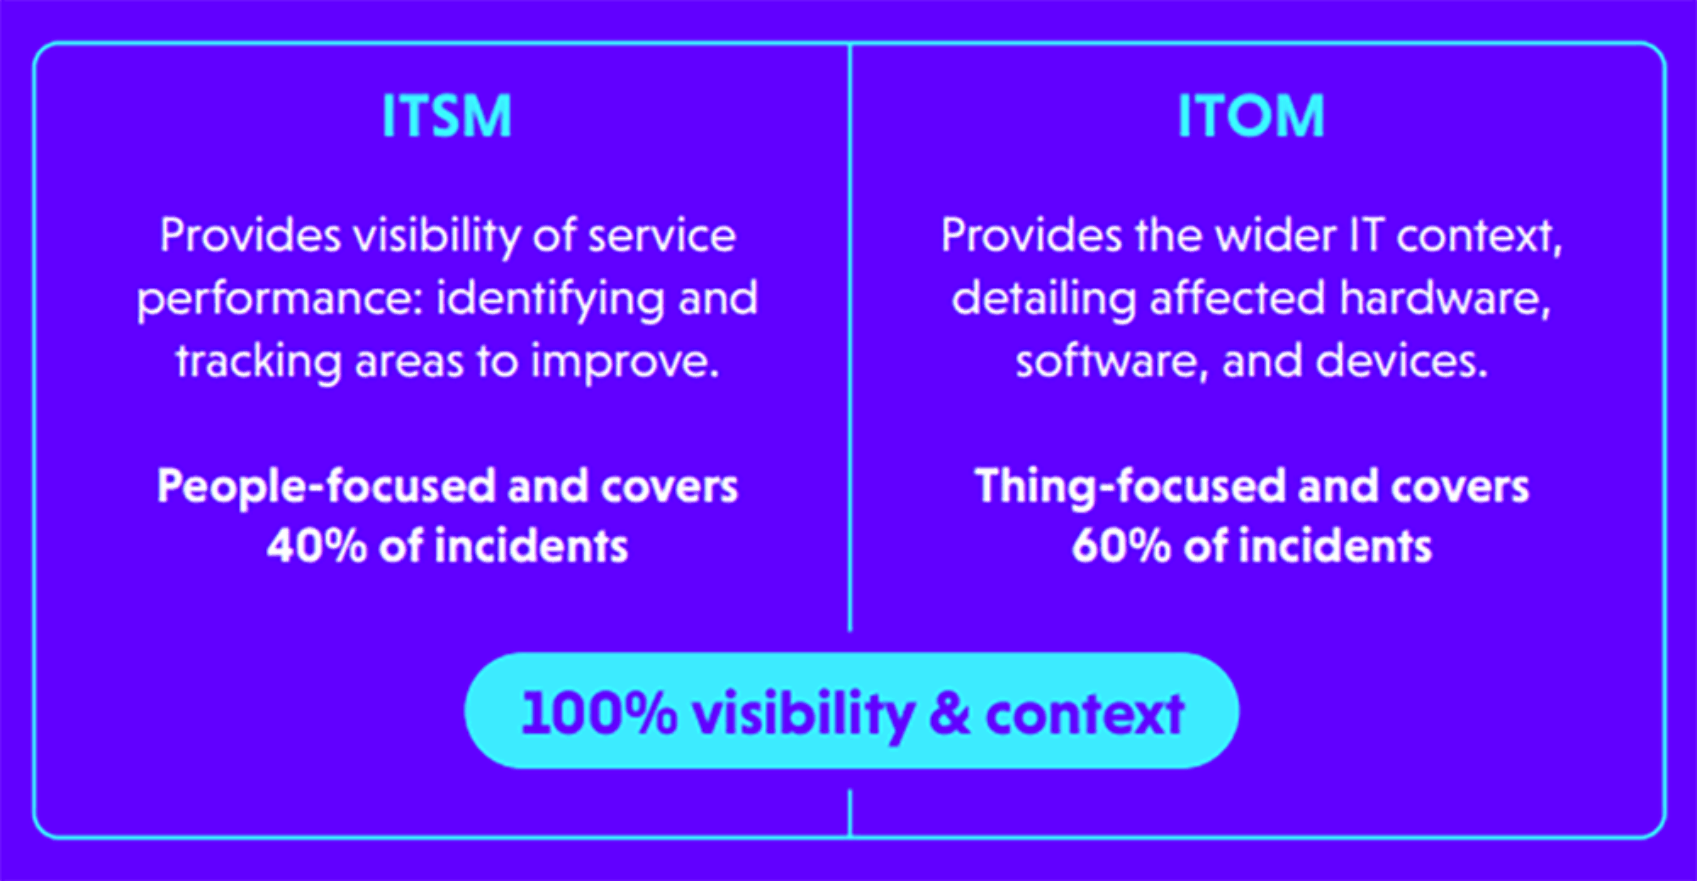 Show how combining ITSM and ITOM provides visibility and context across 100% of your environment.